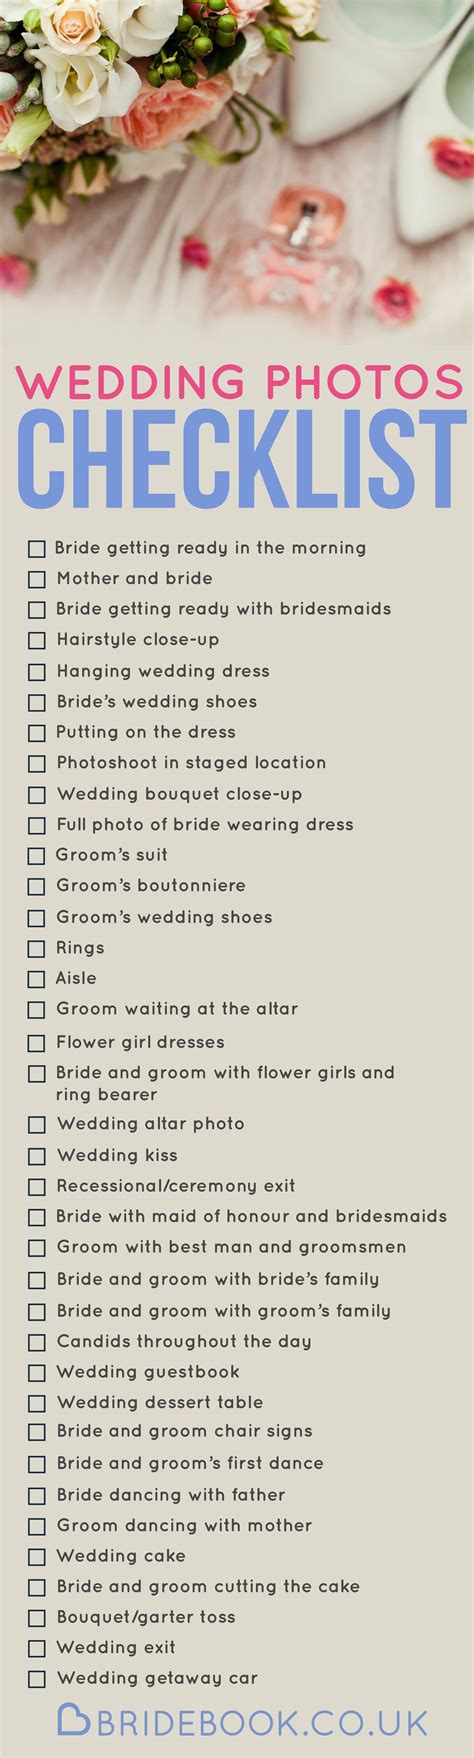 Wedding Photographers Checklist (Includes Free Download)